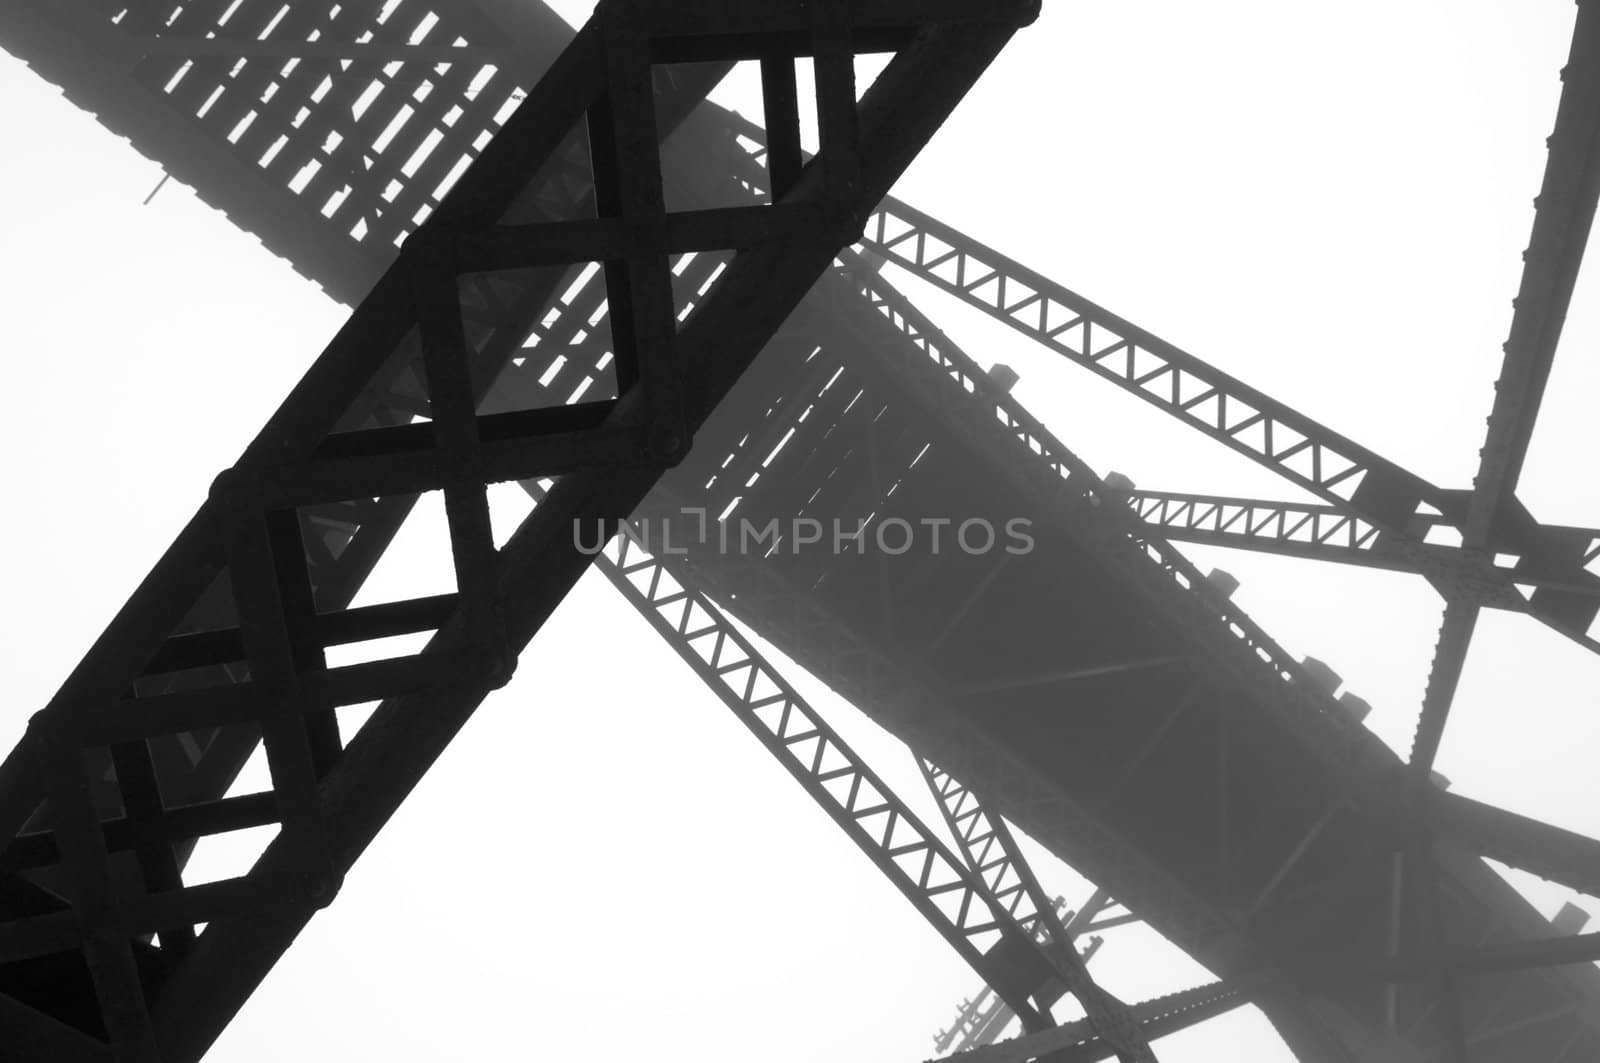 High contrast abstract image of steel girders used in a train bridge on a foggy morning